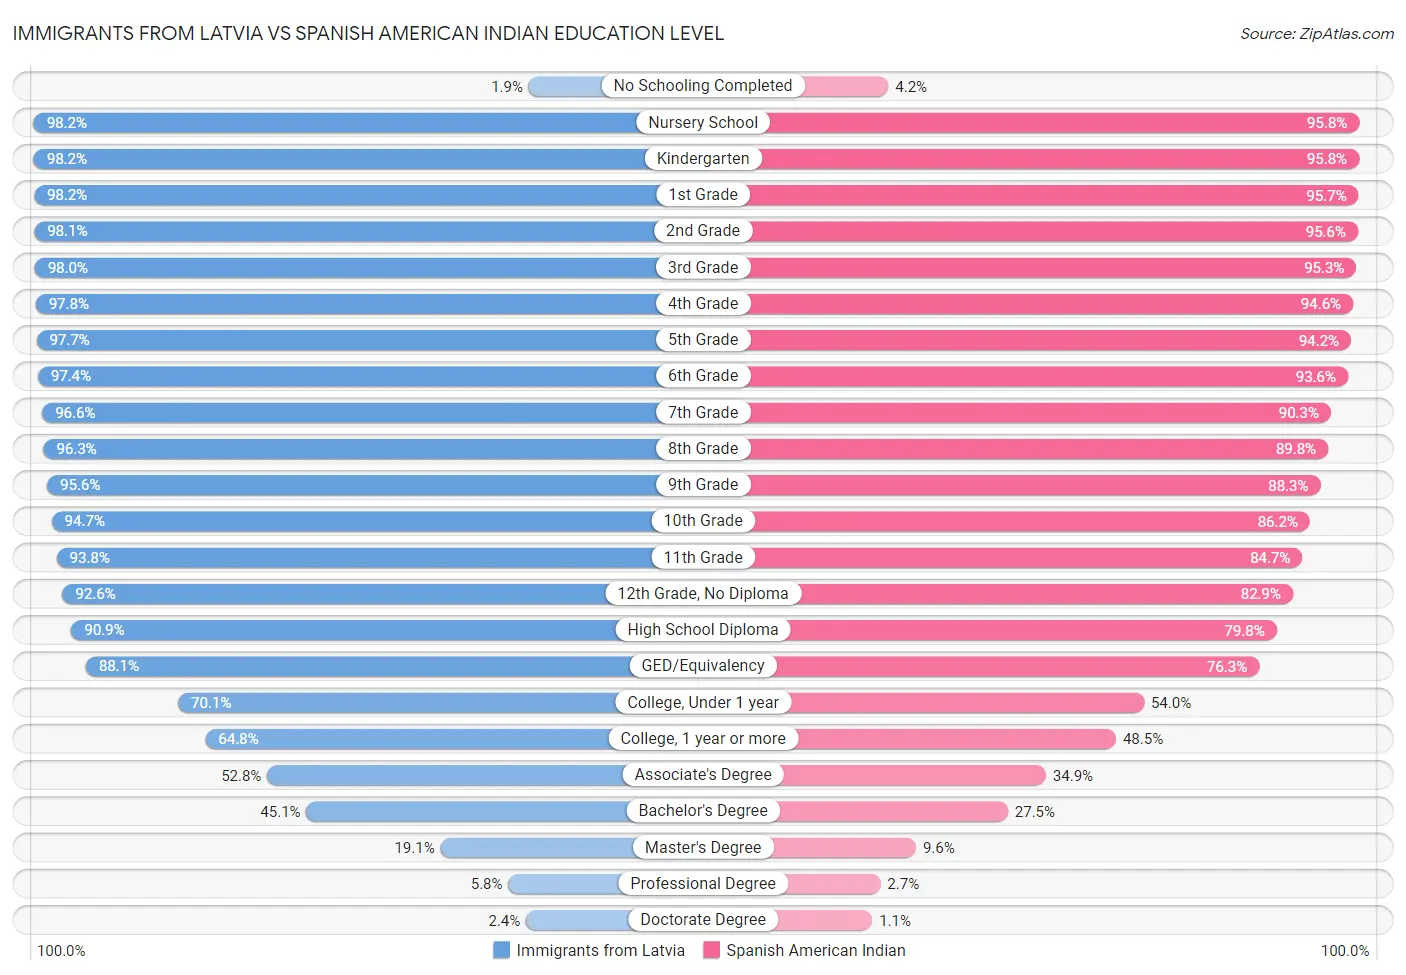 Immigrants from Latvia vs Spanish American Indian Education Level